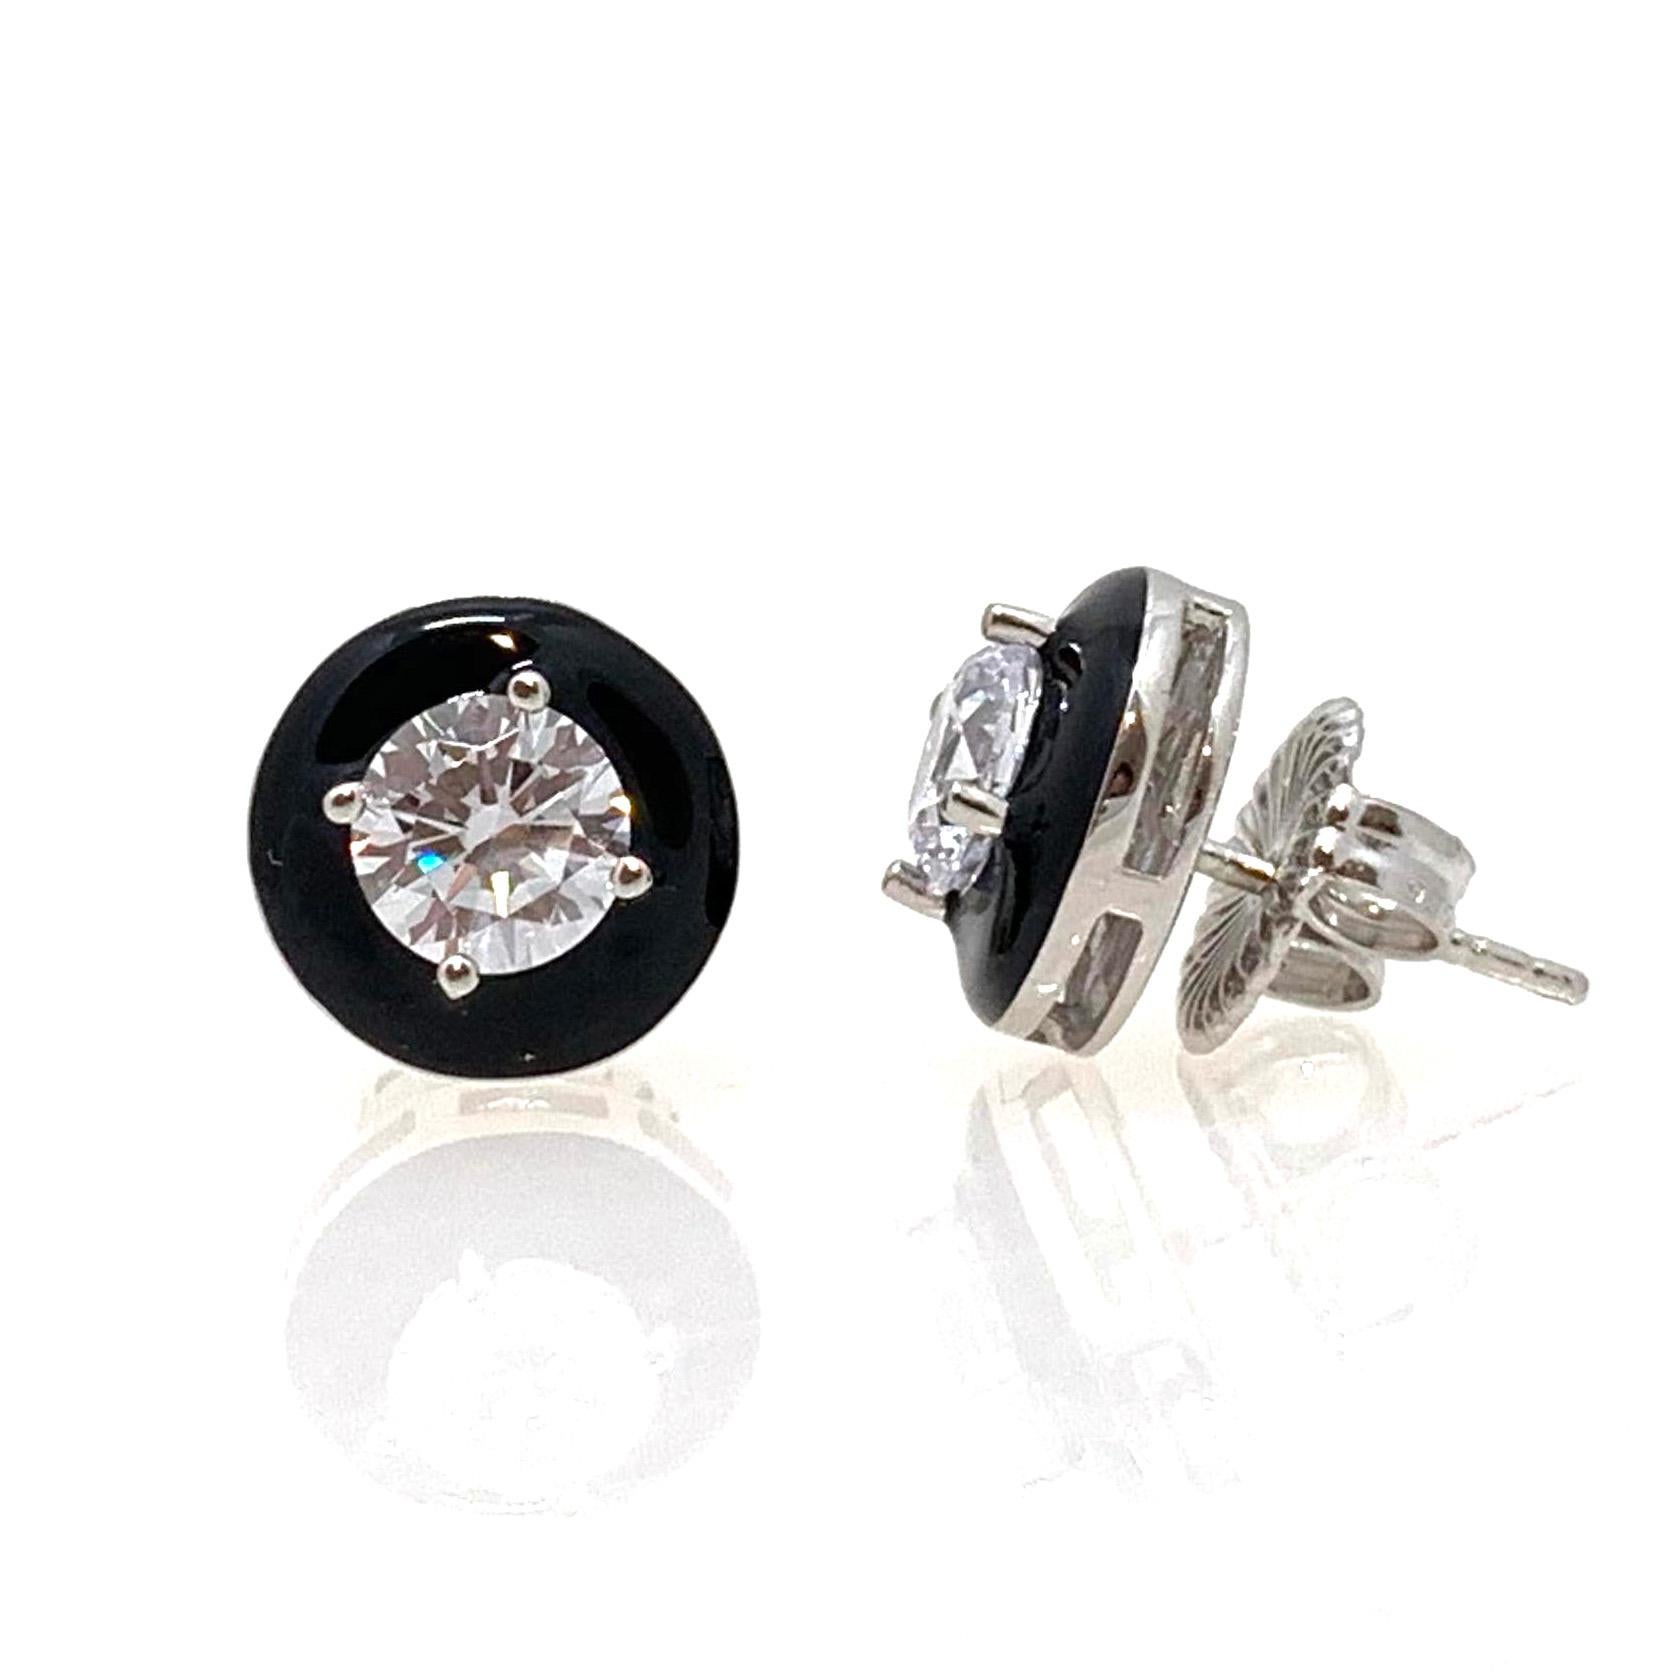 Contemporary Modern Black Enamel 1ct Round Simulated Diamond Stud Sterling Silver Earrings For Sale